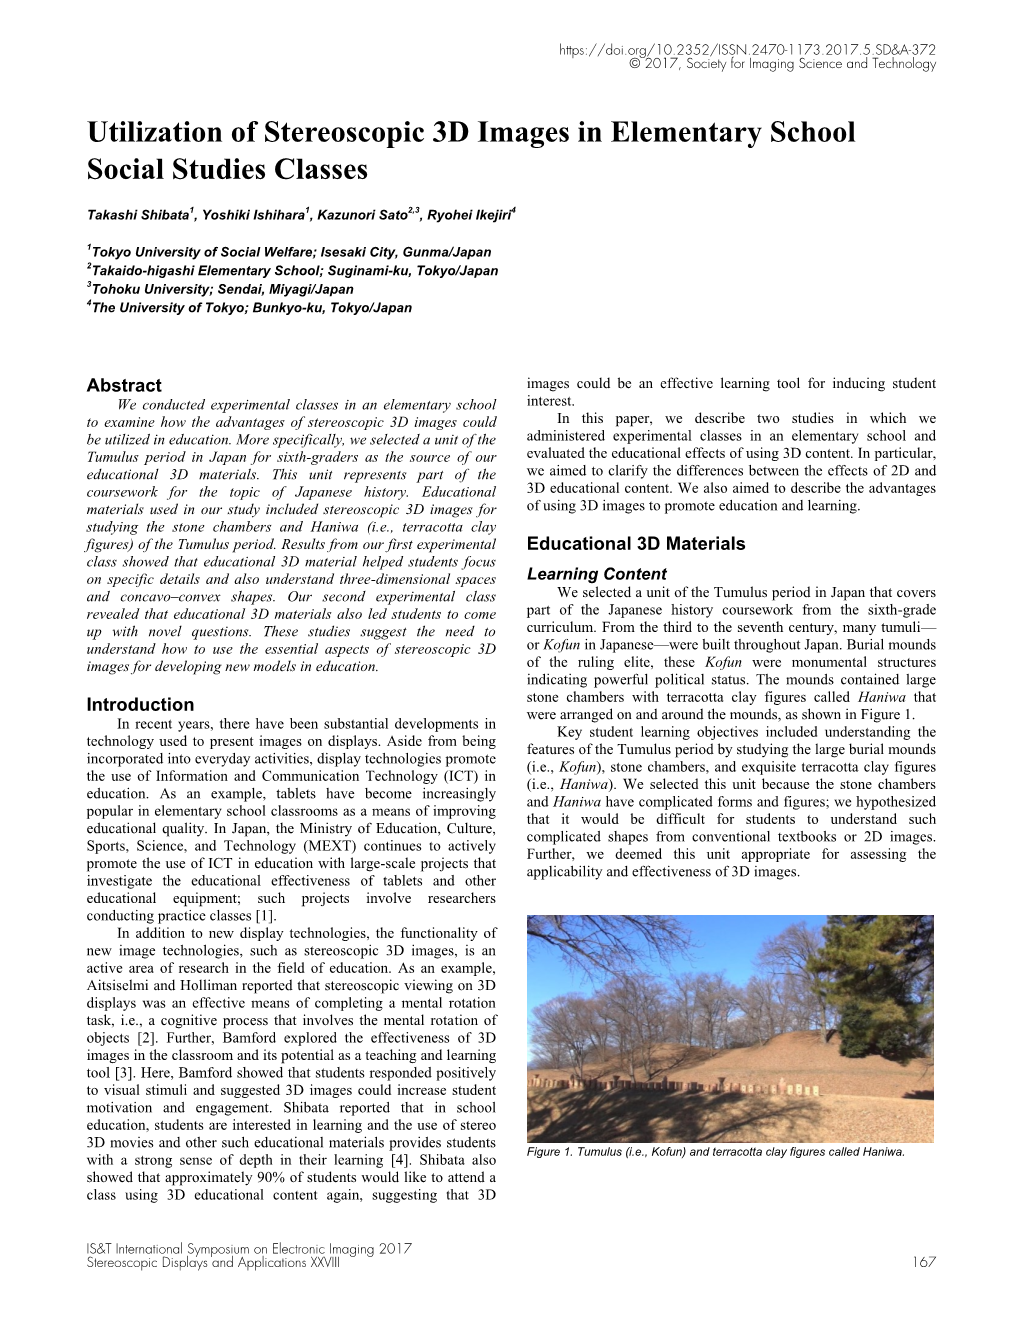 Utilization of Stereoscopic 3D Images in Elementary School Social Studies Classes